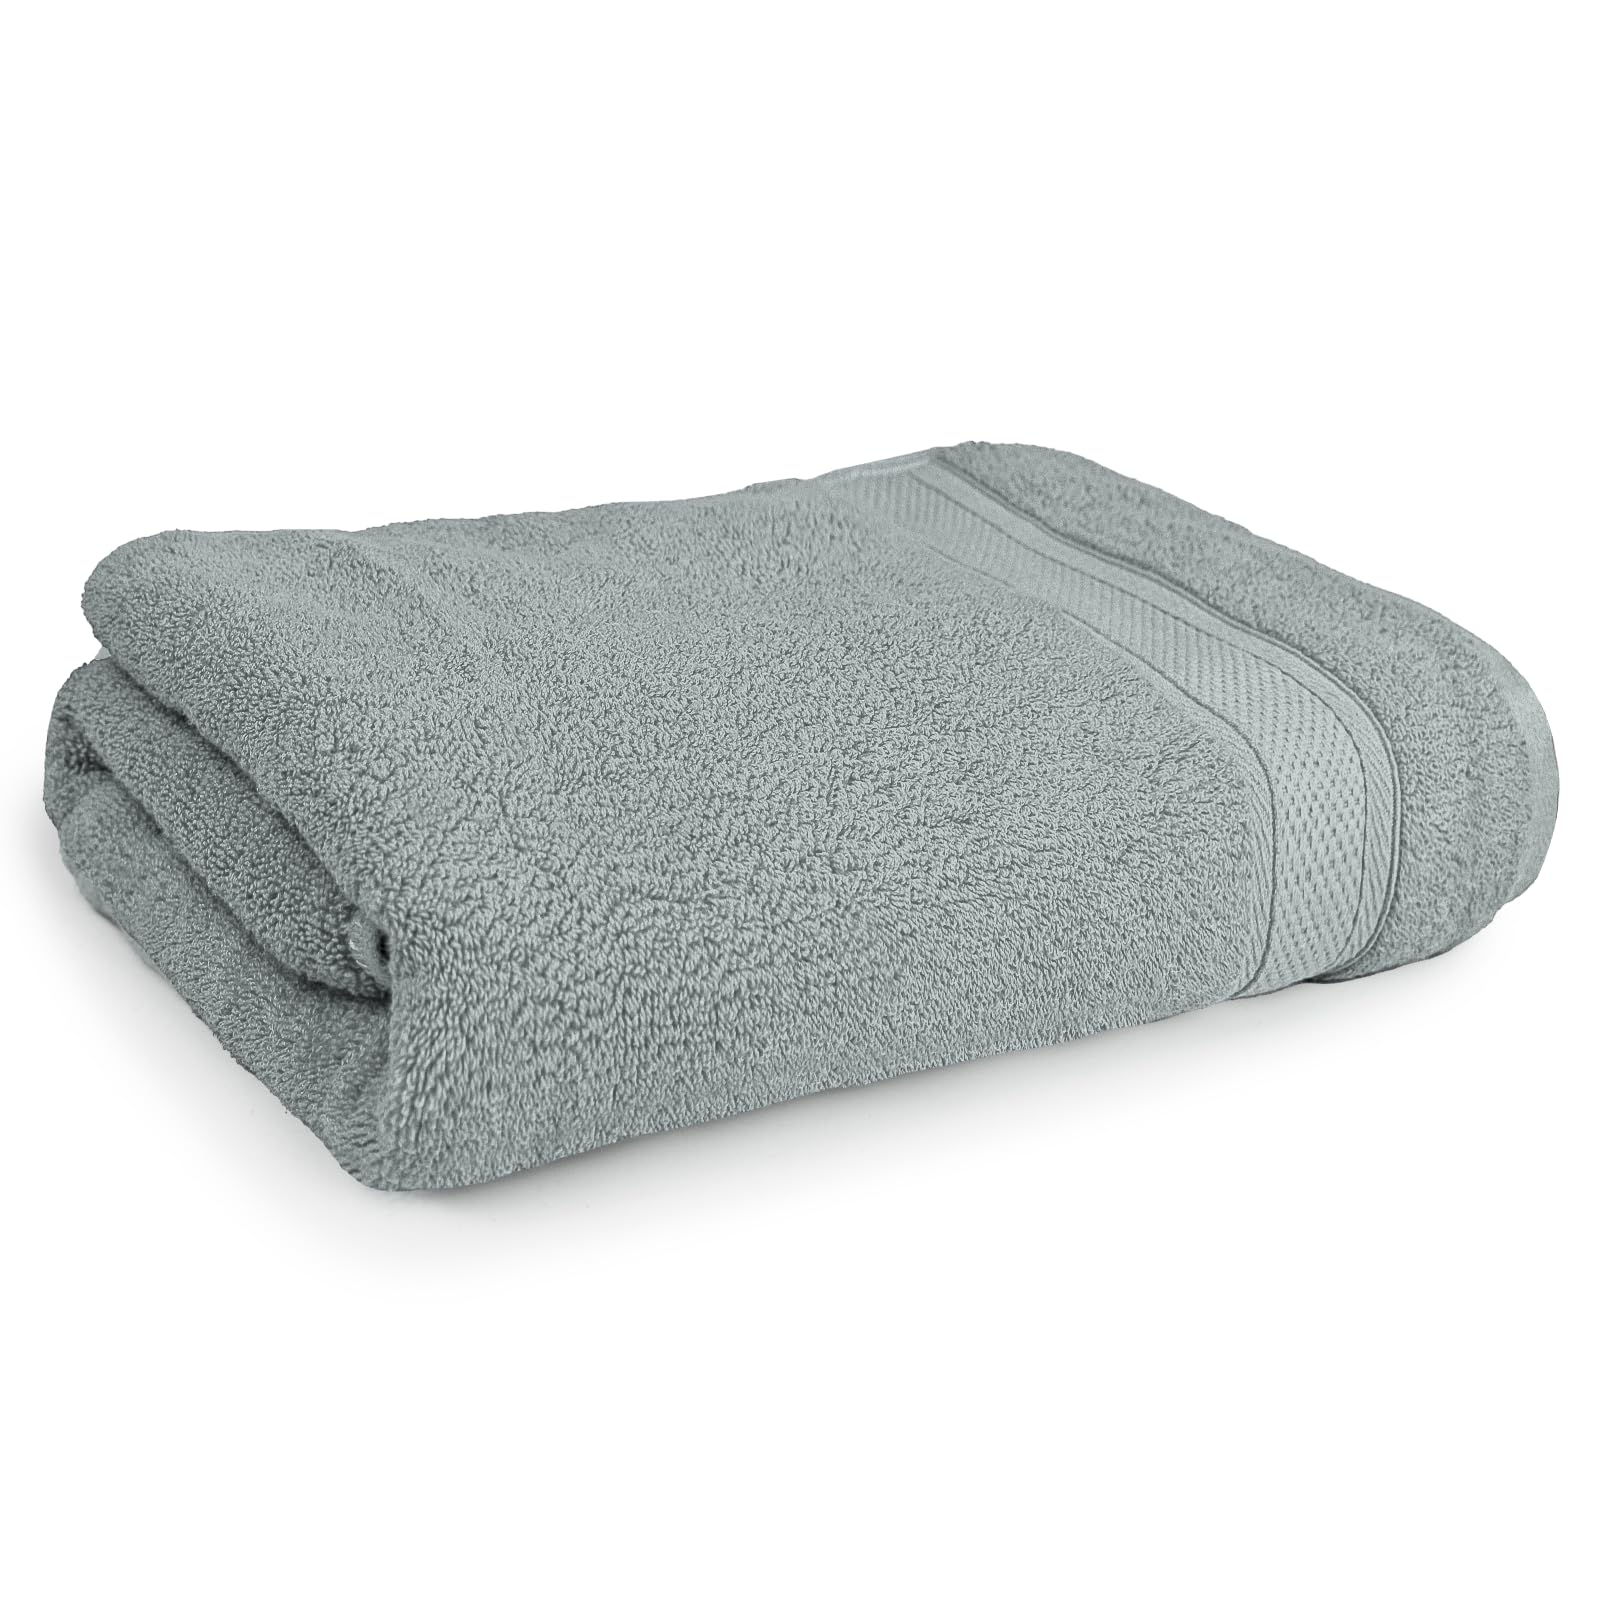 Magshion Extra Large Cotton Bath Sheet for Bathroom Adults Oversized Quick-Dry Bath Sheet Towel, Gray